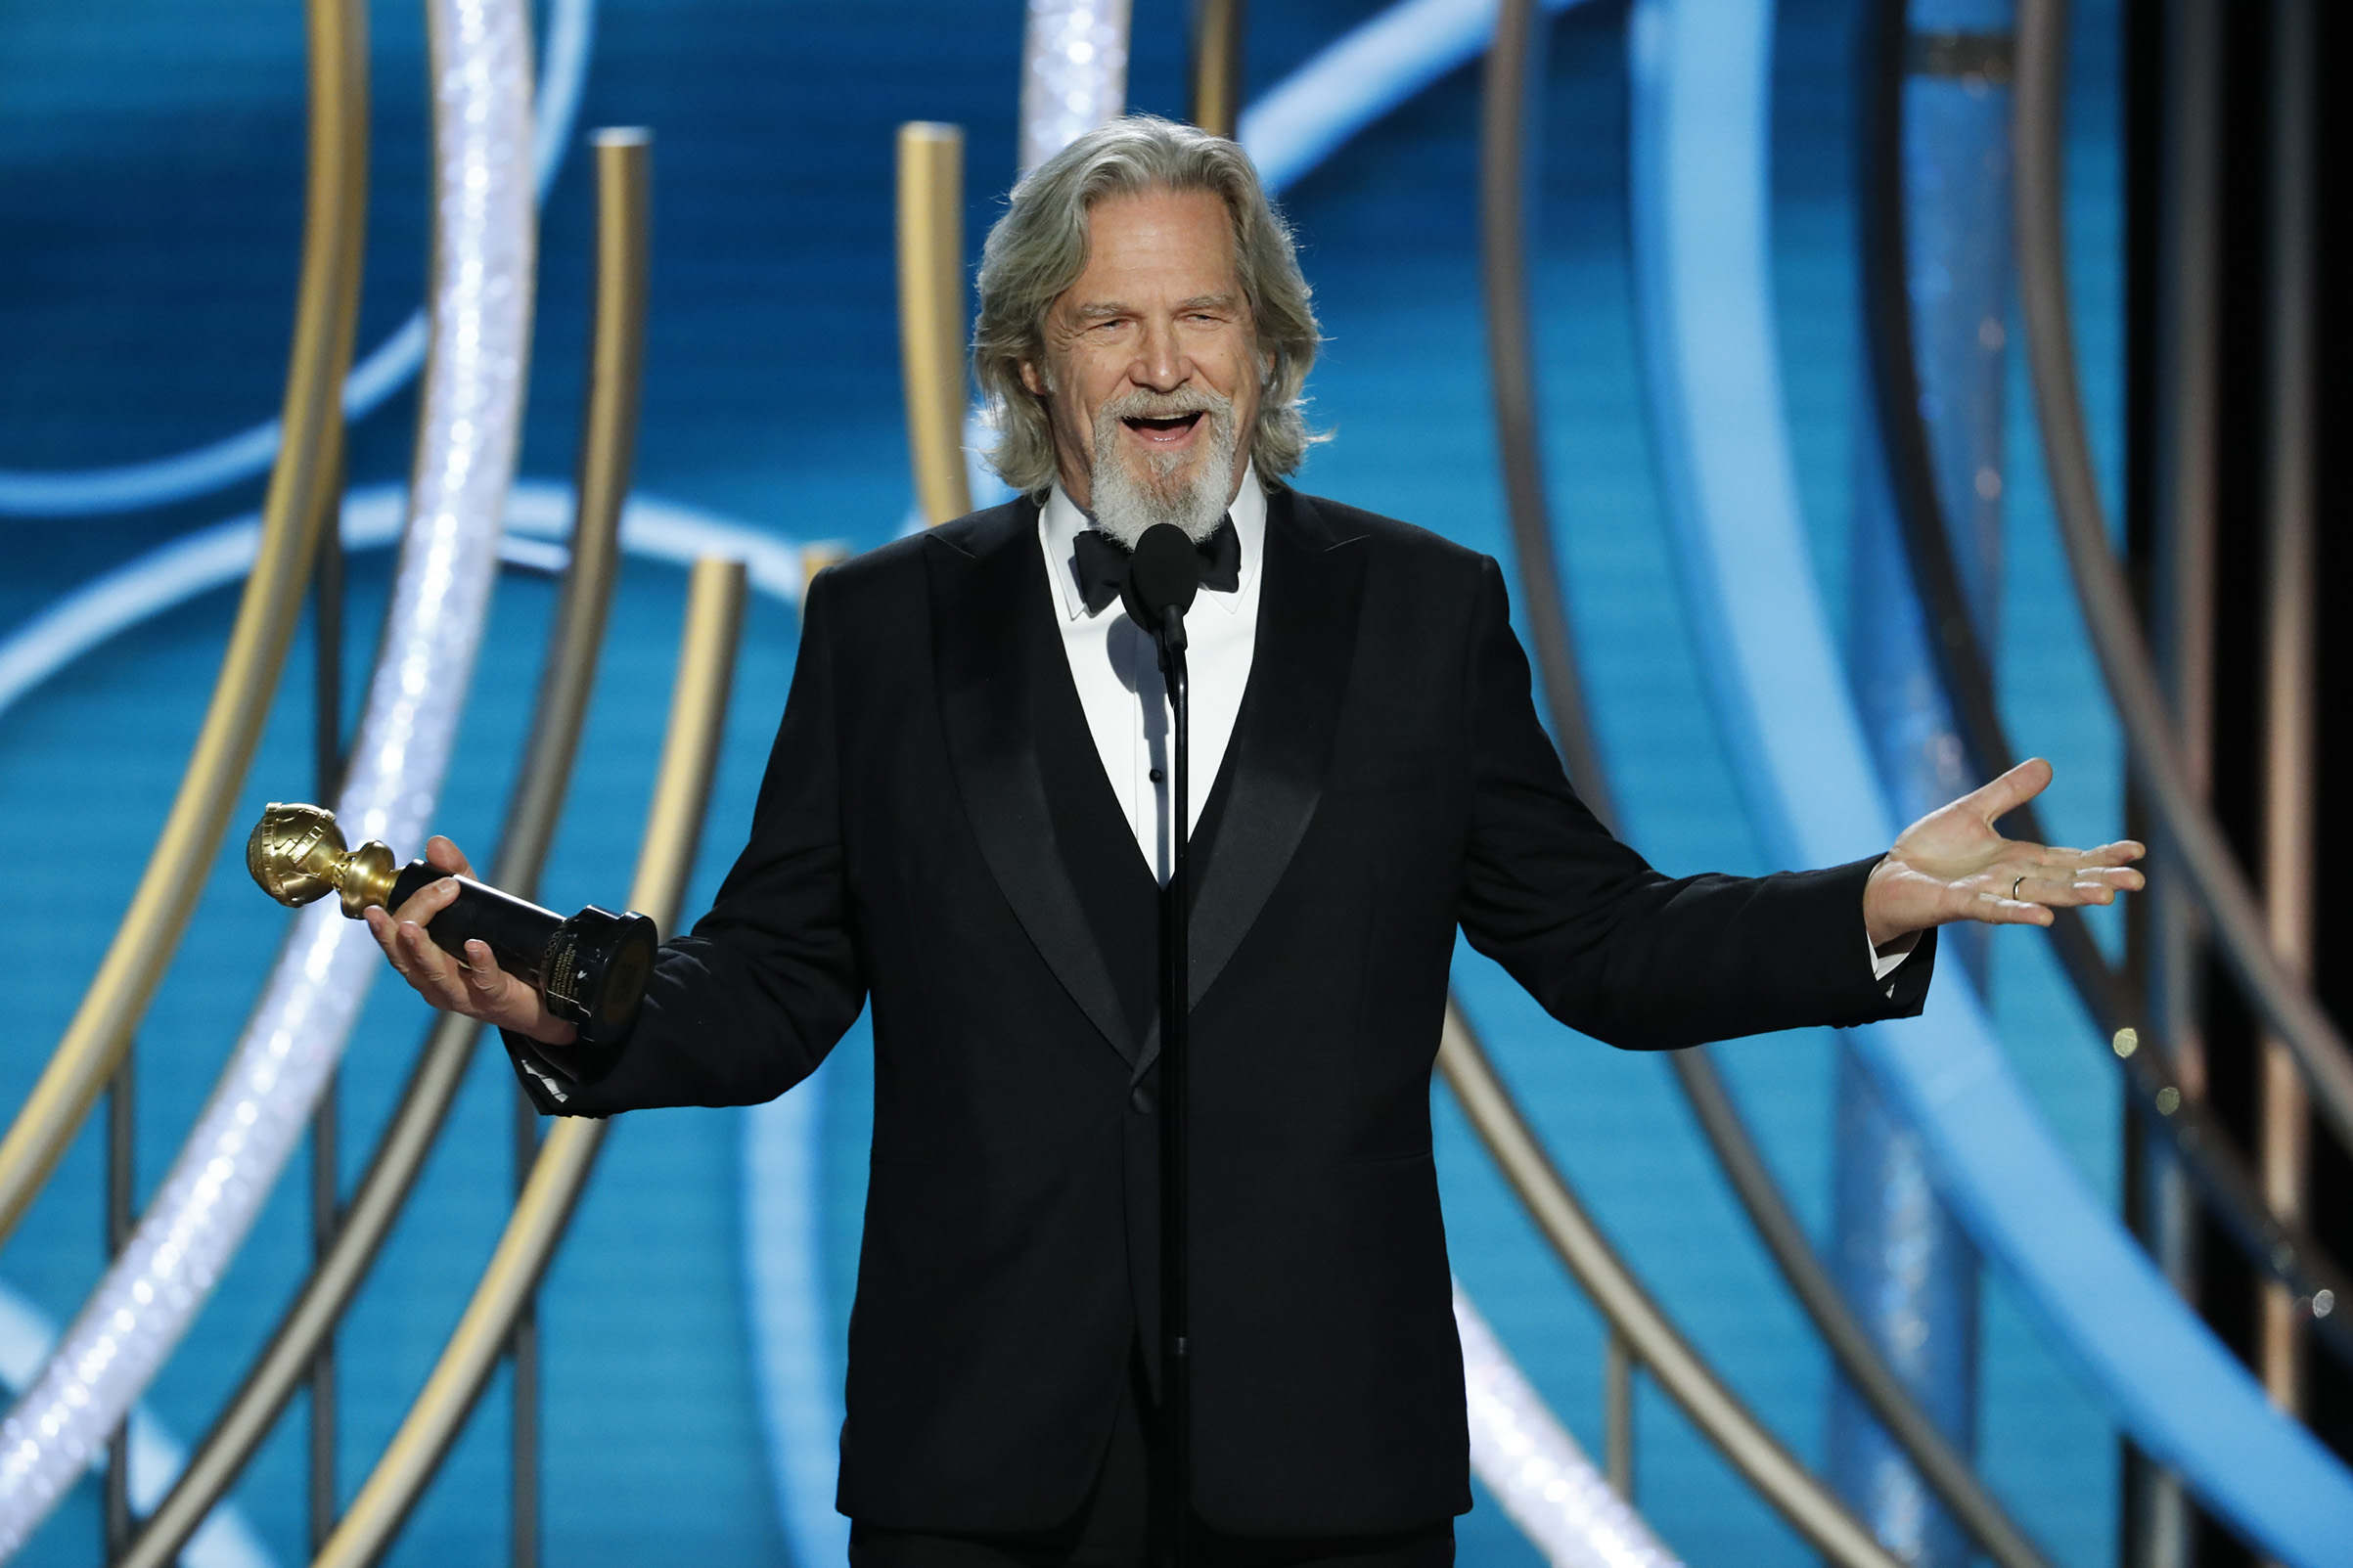 Jeff Bridges accepts the Cecil B. Demille Award onstage during the 76th Annual Golden Globe Awards. (NBCUniversal/Getty Images)